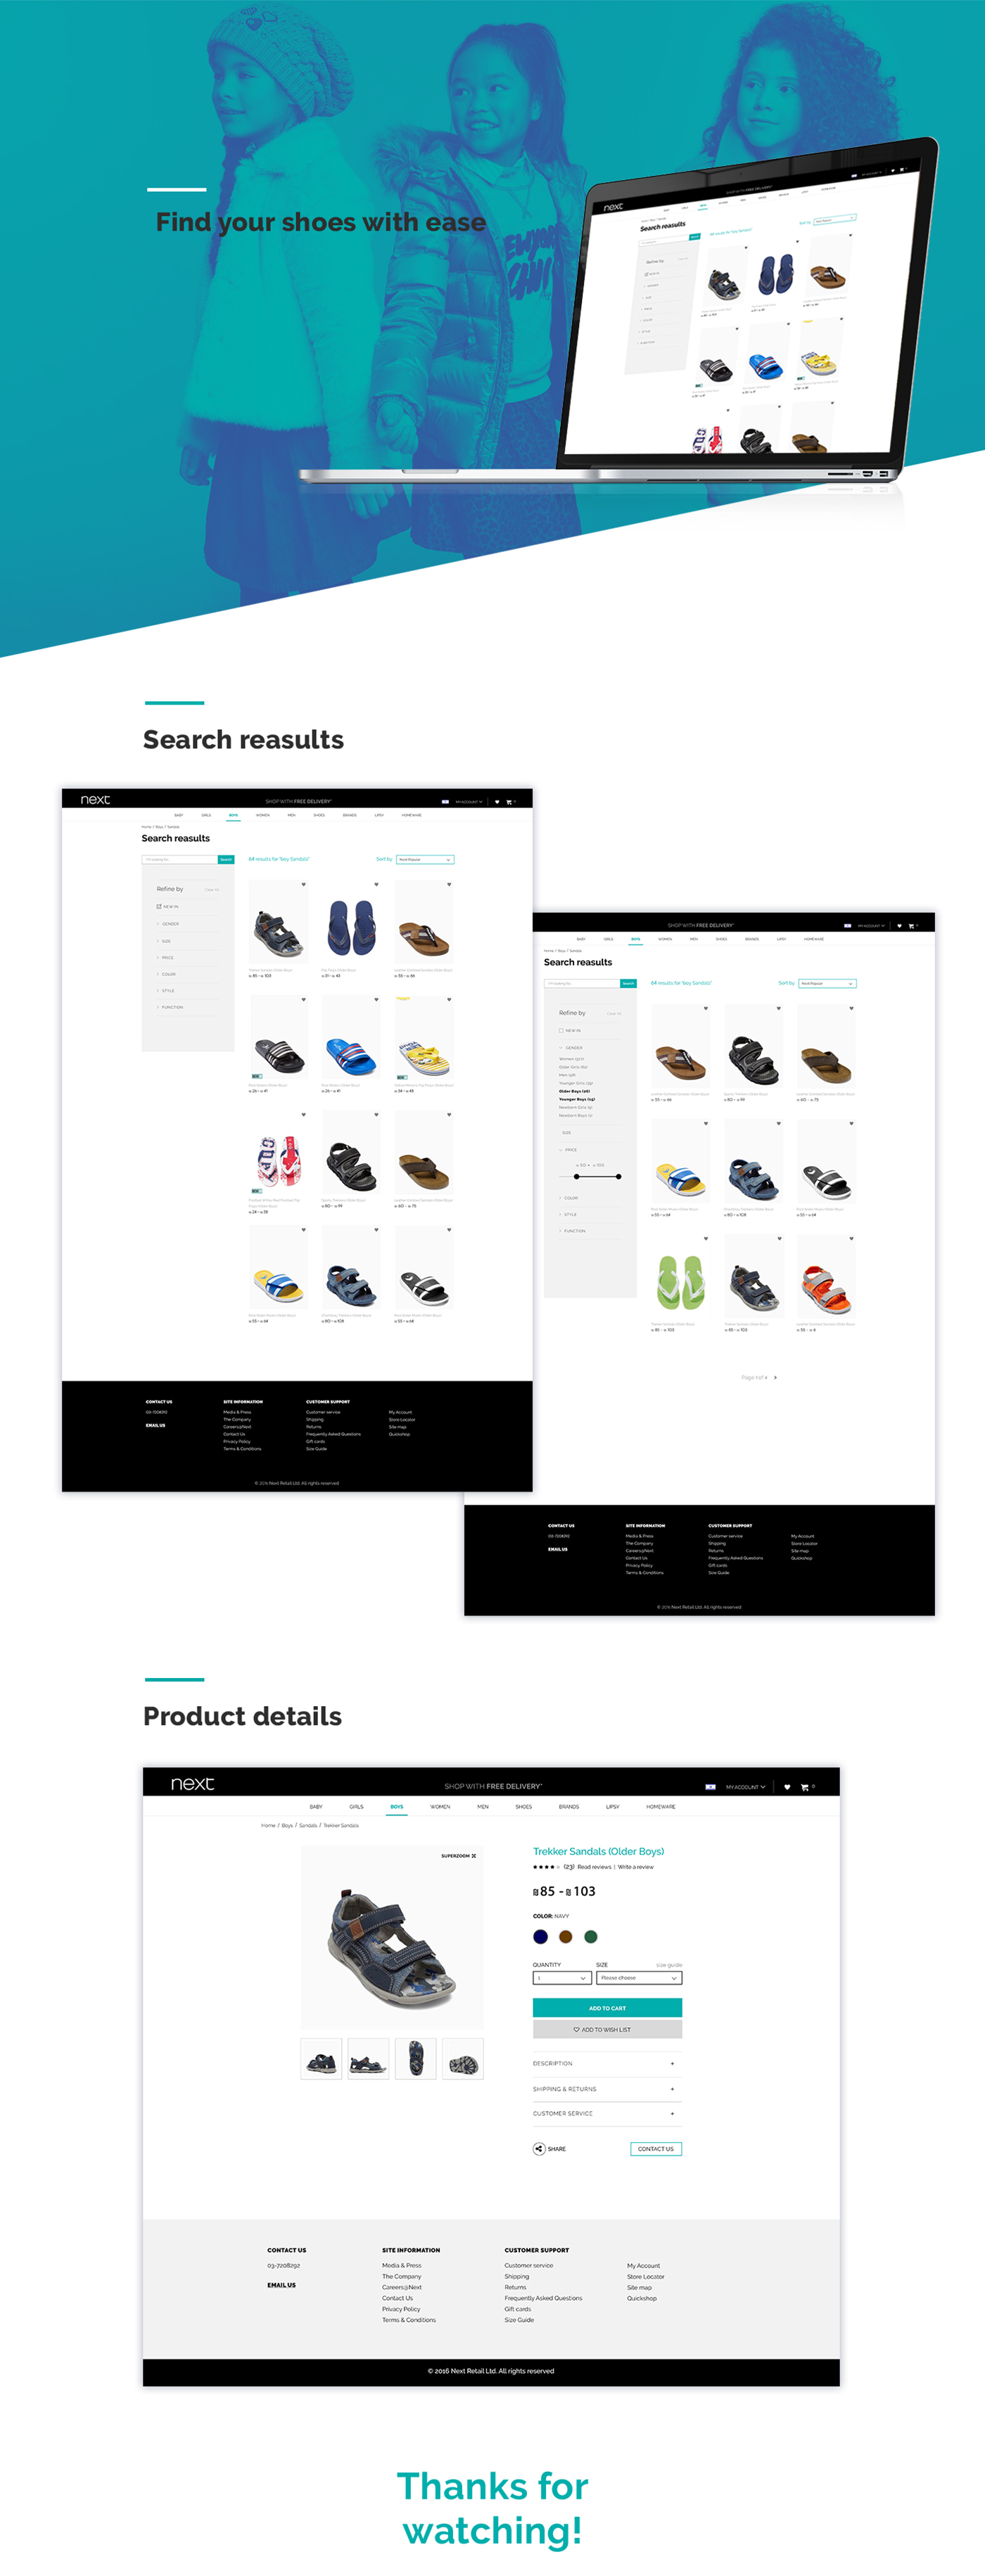 redesign motion design interactive Ecommerce Fashion  clothes shoes Style shop brand